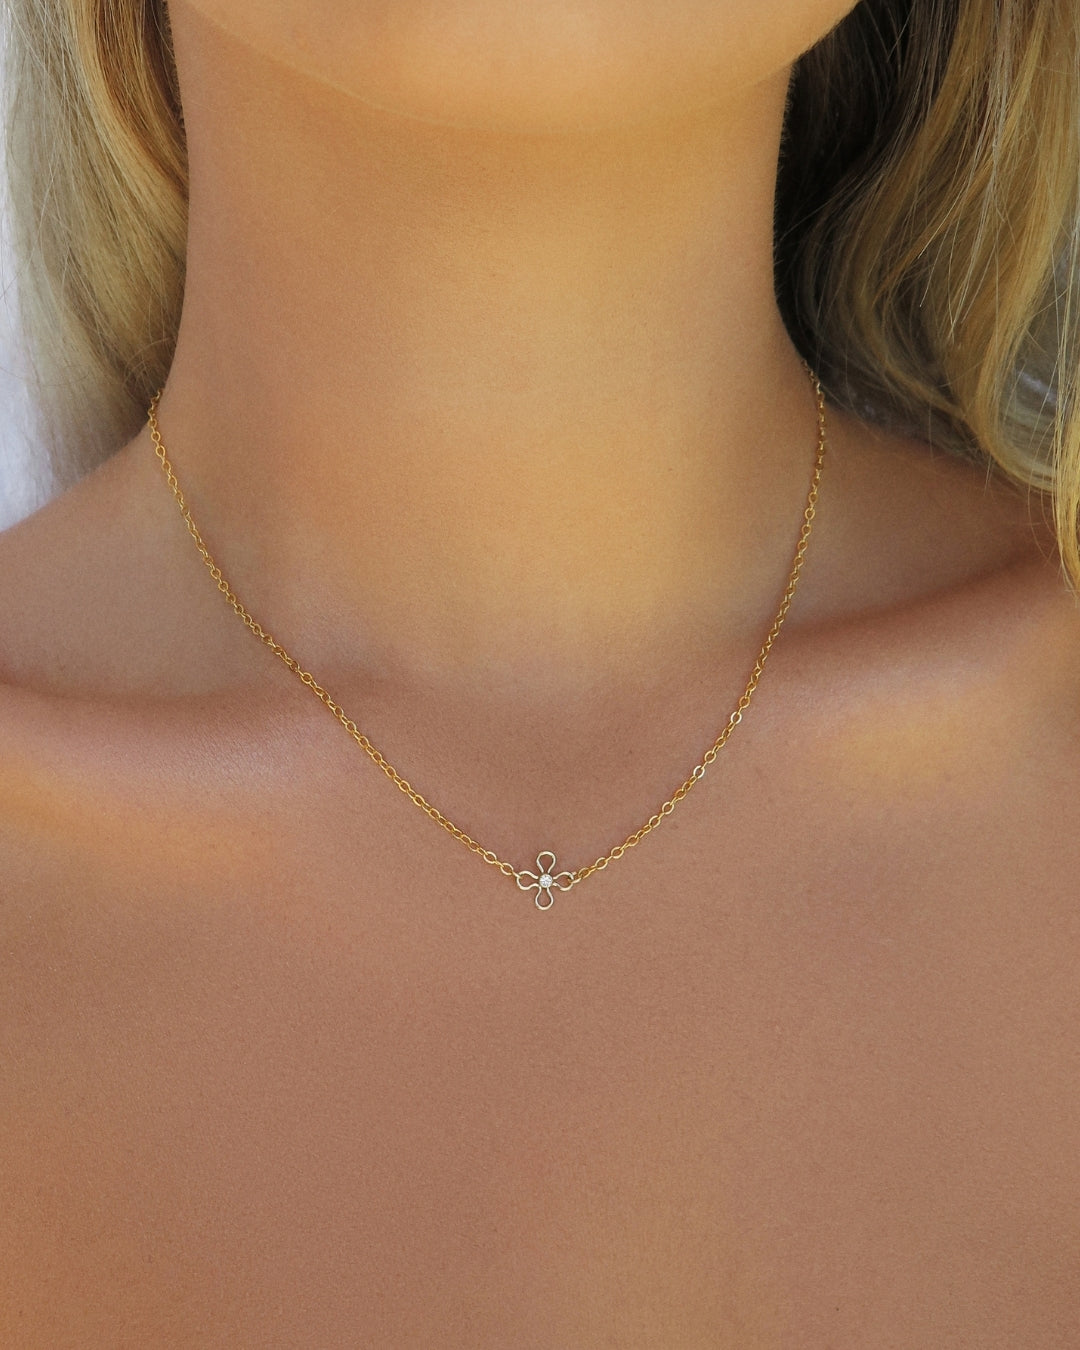 White CZ Flower Necklace  - 14k Yellow Gold Fill